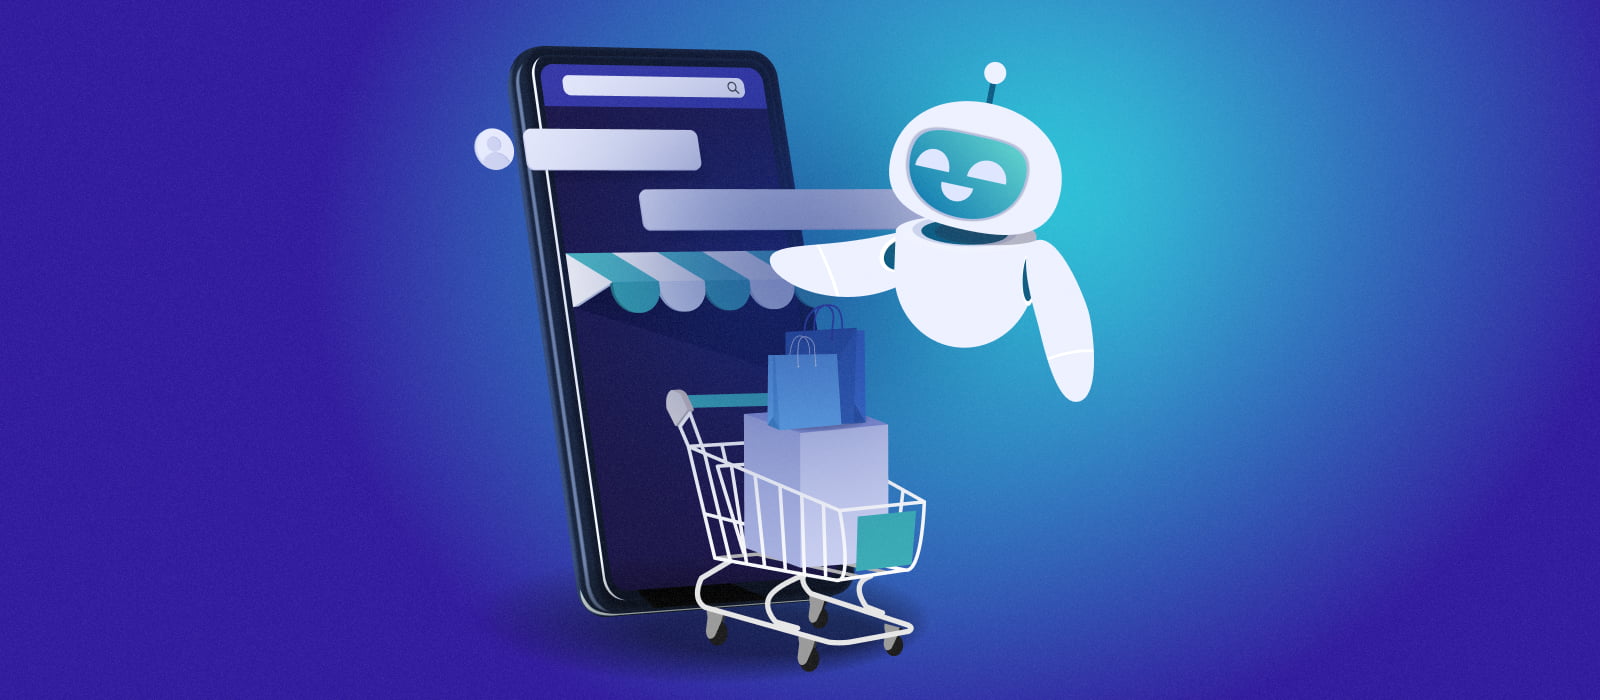 AI in ecommerce